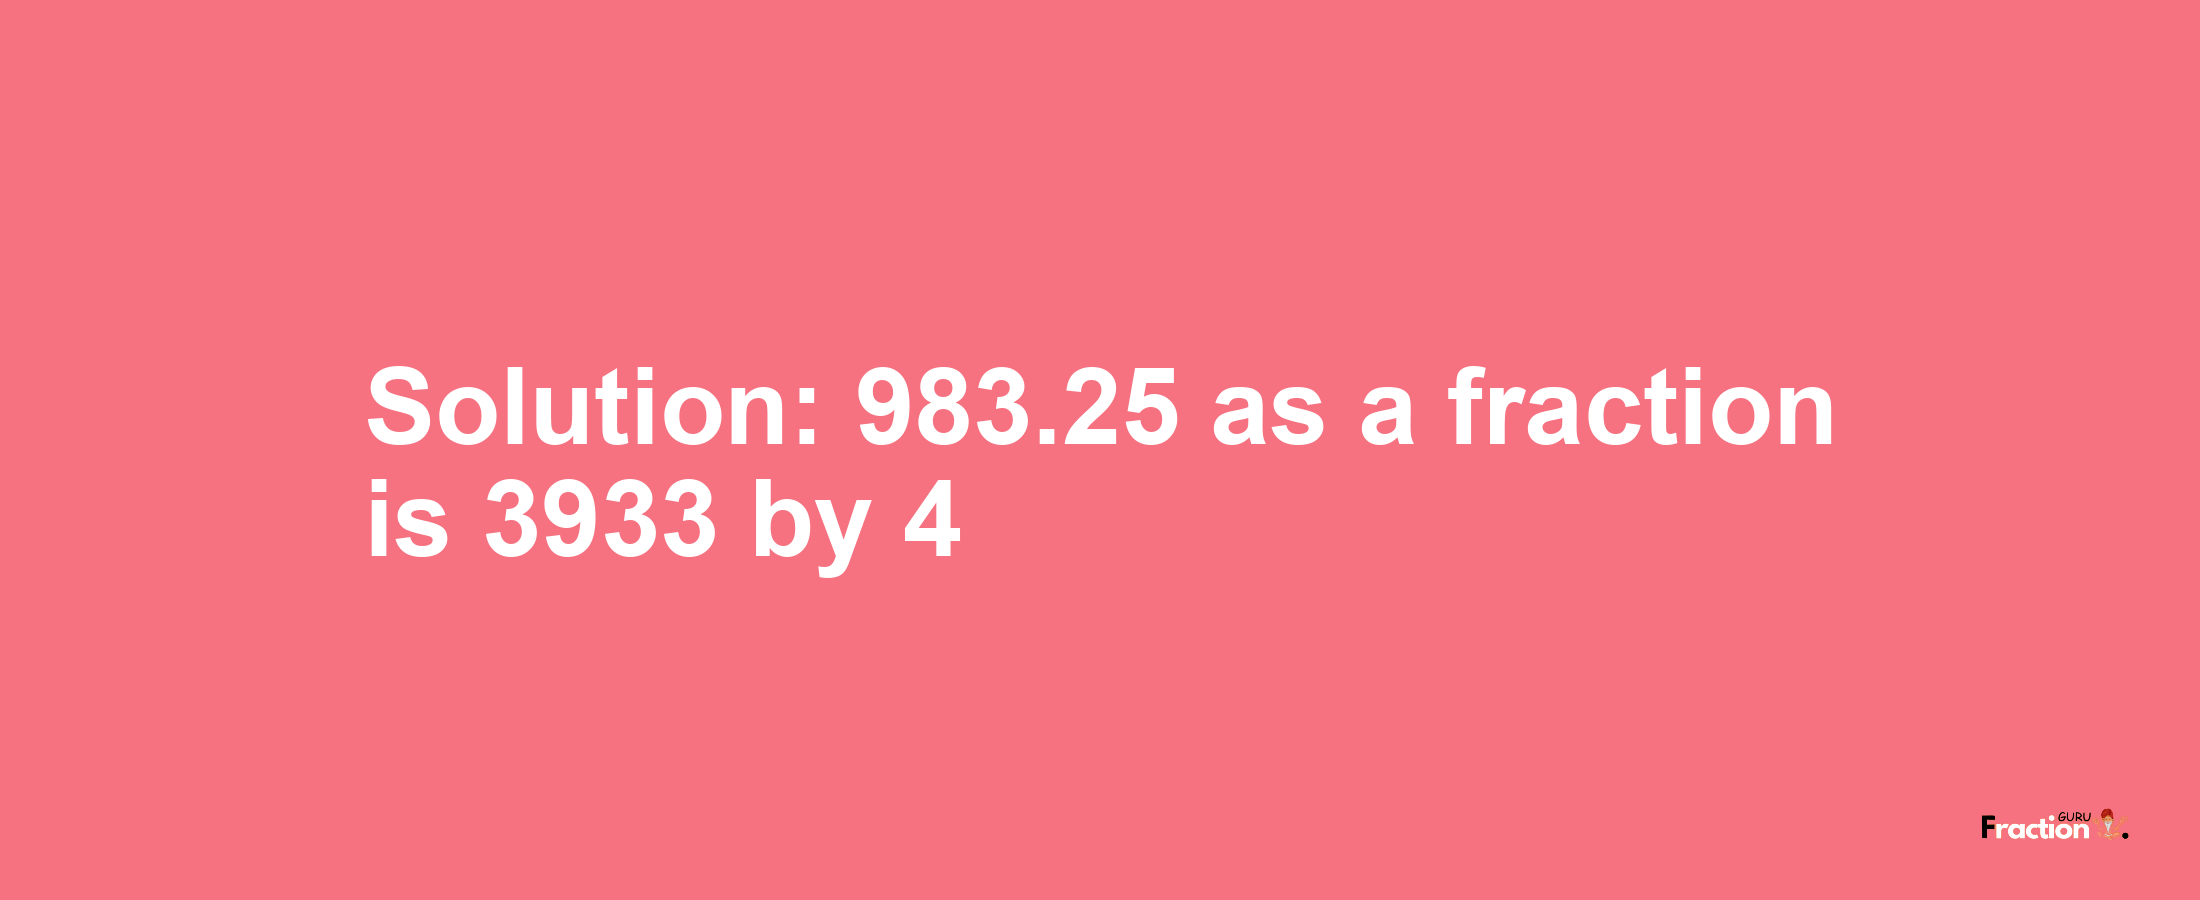 Solution:983.25 as a fraction is 3933/4